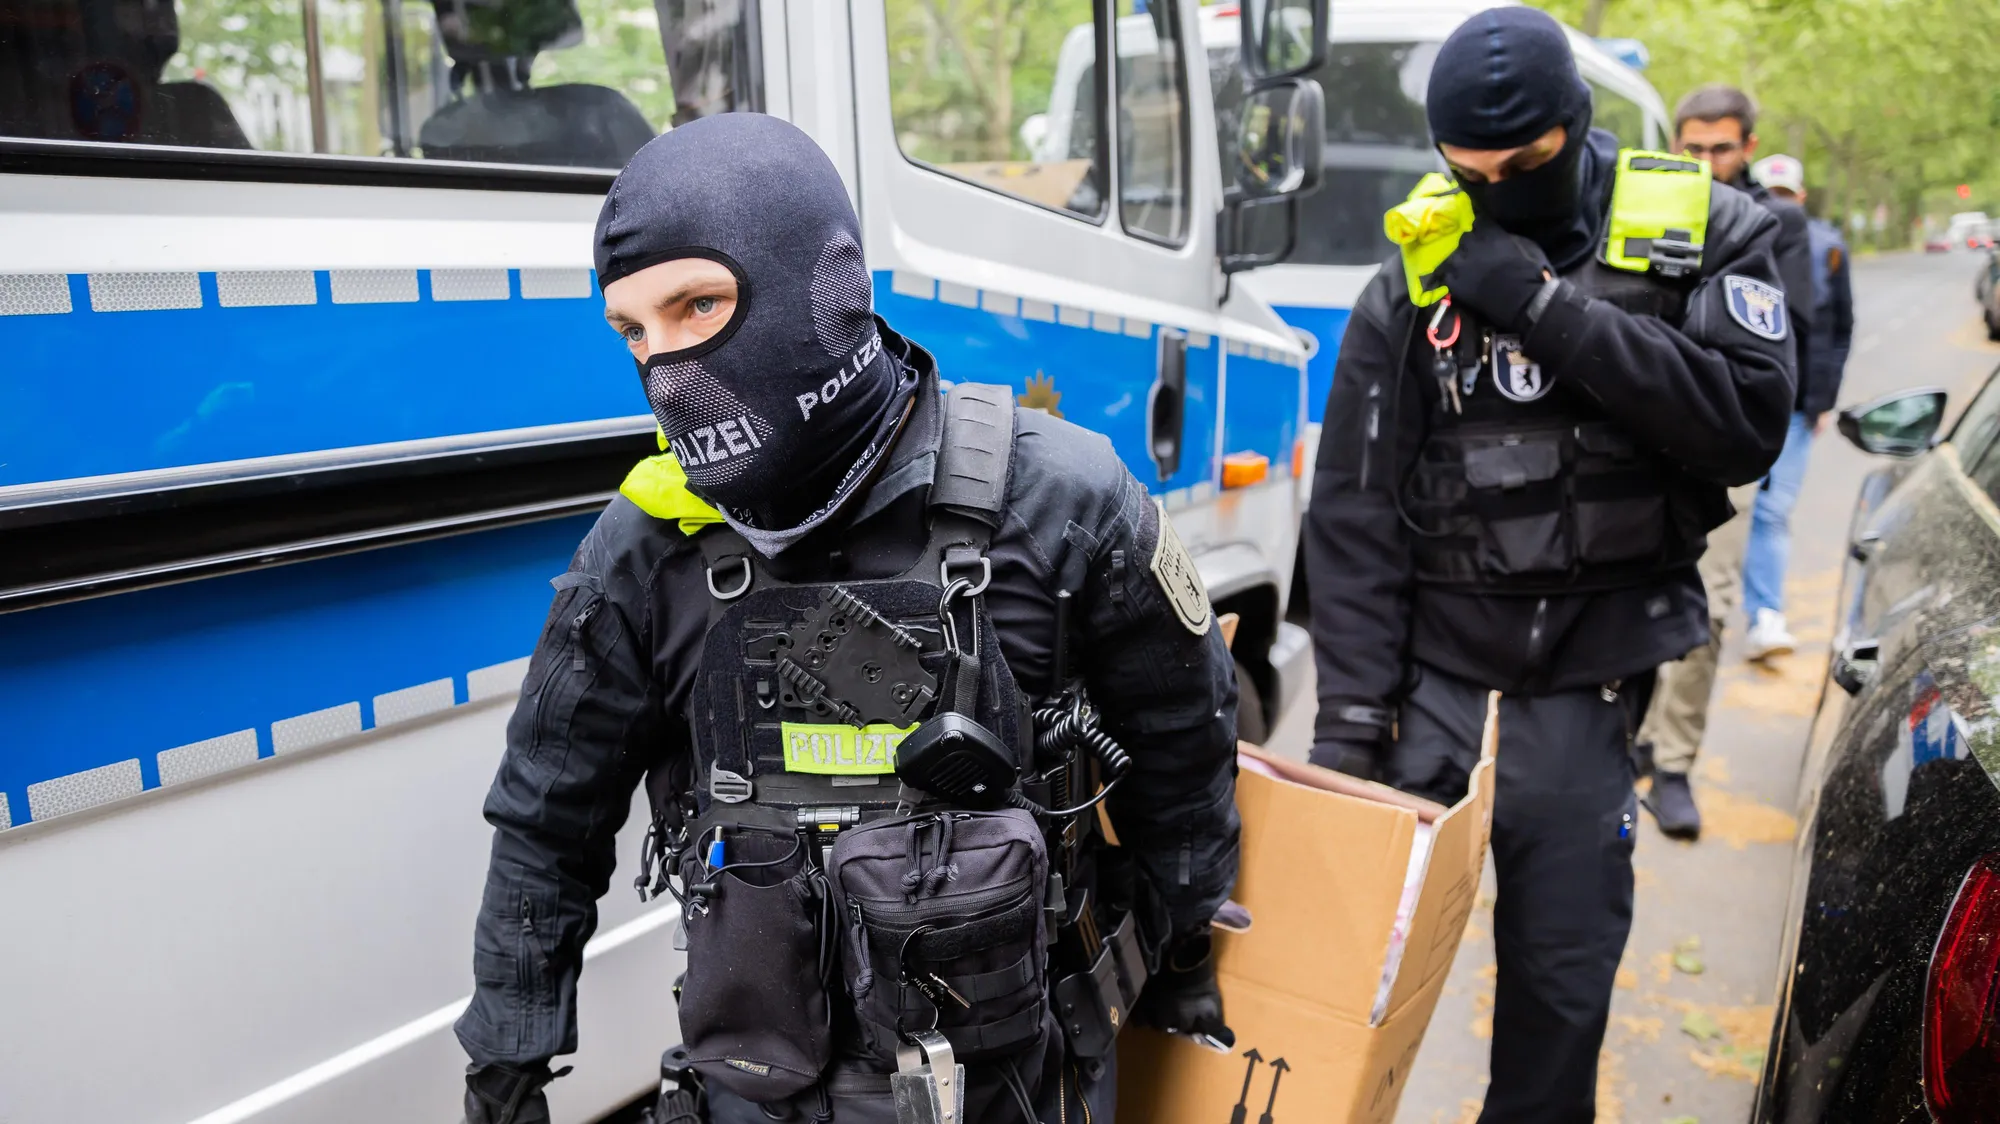 Nationwide Crackdown on Last Generation: Seven Members are said to have Founded or Supported a Criminal Organization, Germany - 24 May 2023